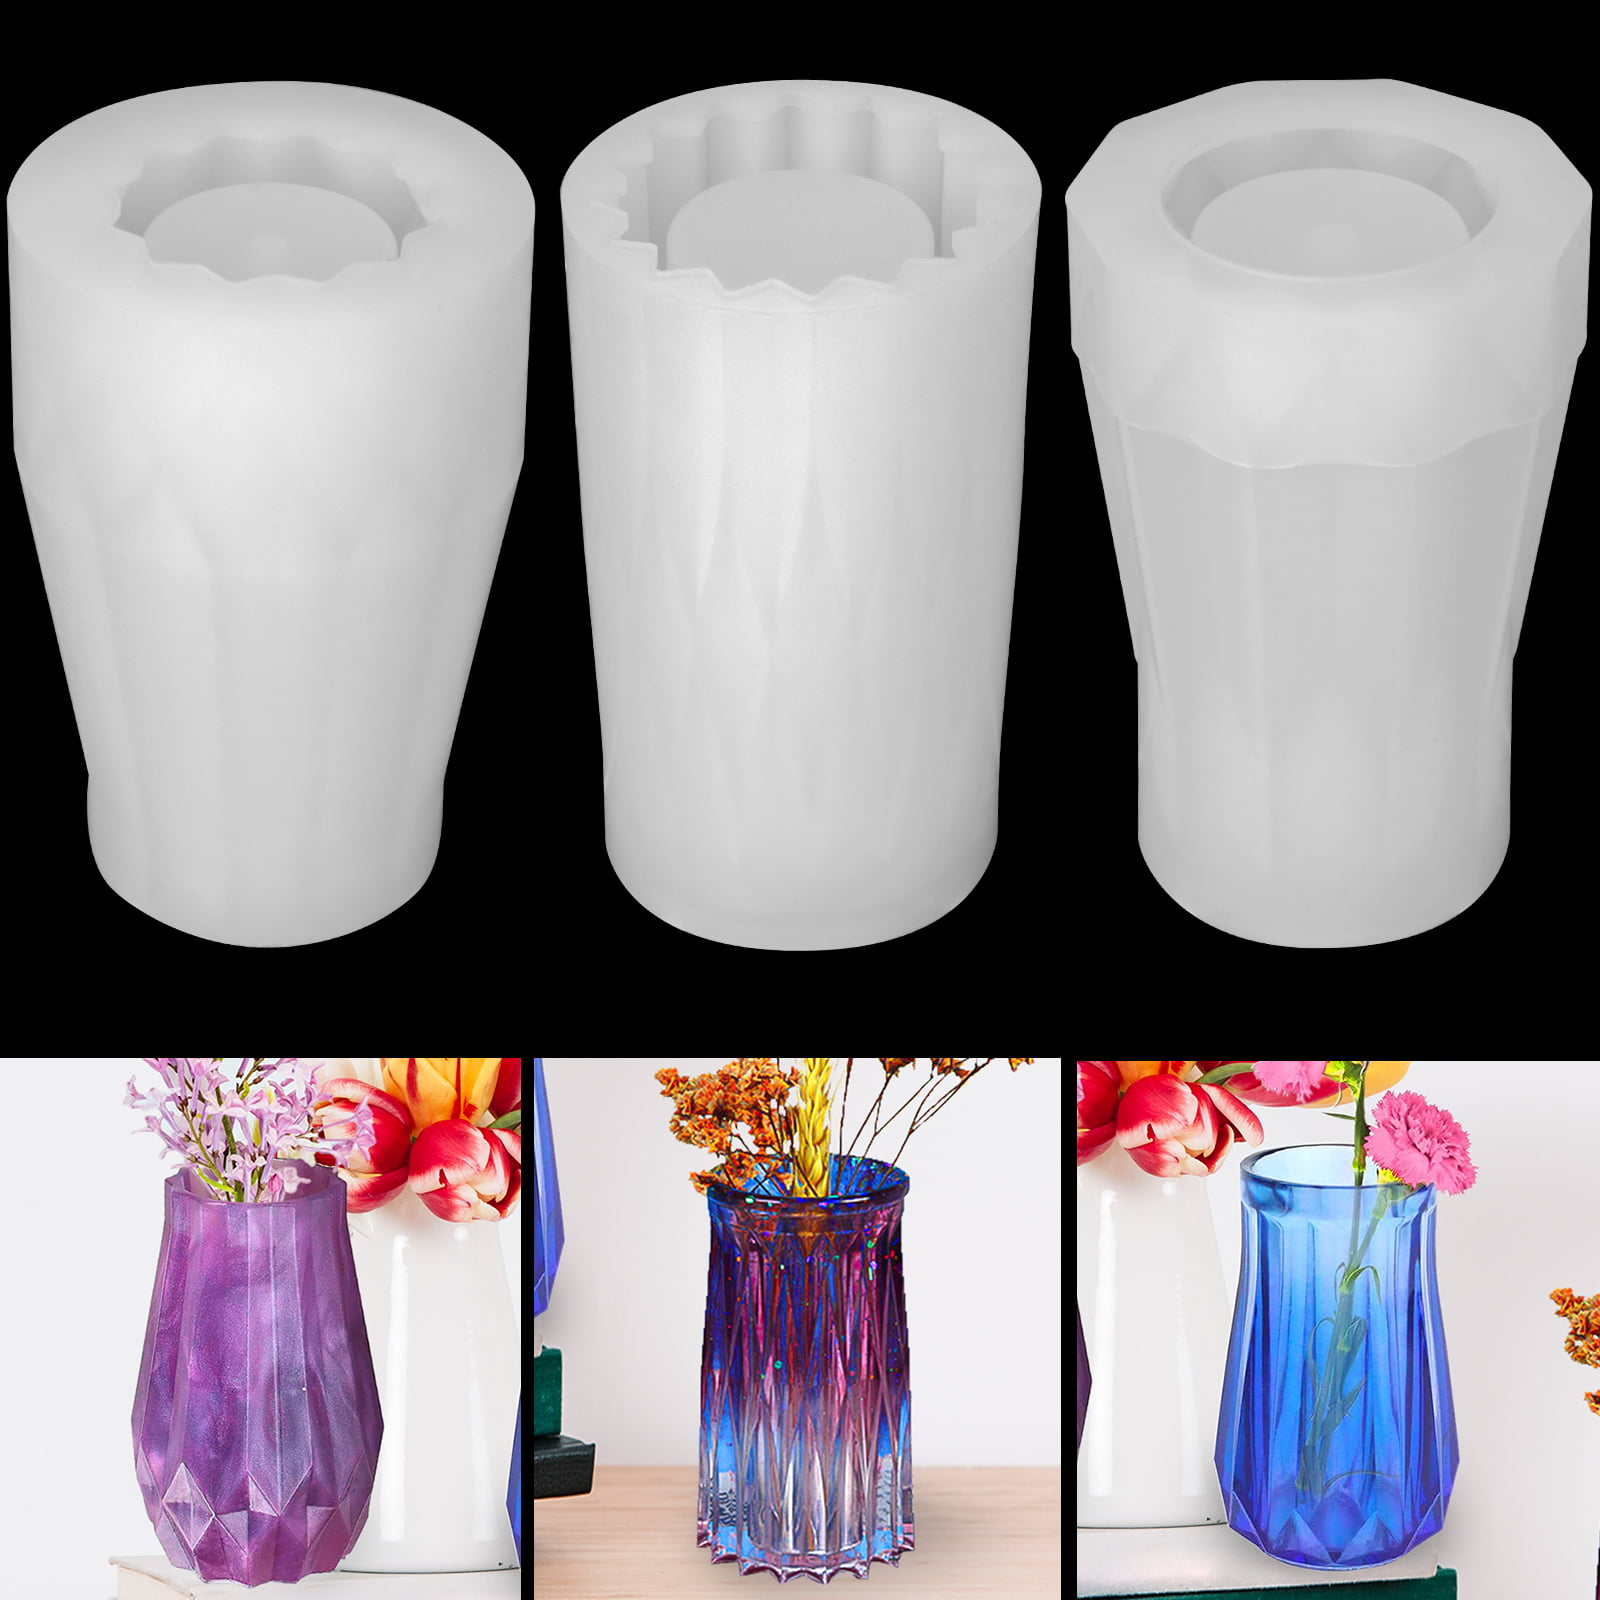 Resin Molds for Vase, Flower Bottle Silicone Epoxy Casting Molds for DIY Jewelry Craft Supplies, Pen Holder, Flower Pot, Home Decoration